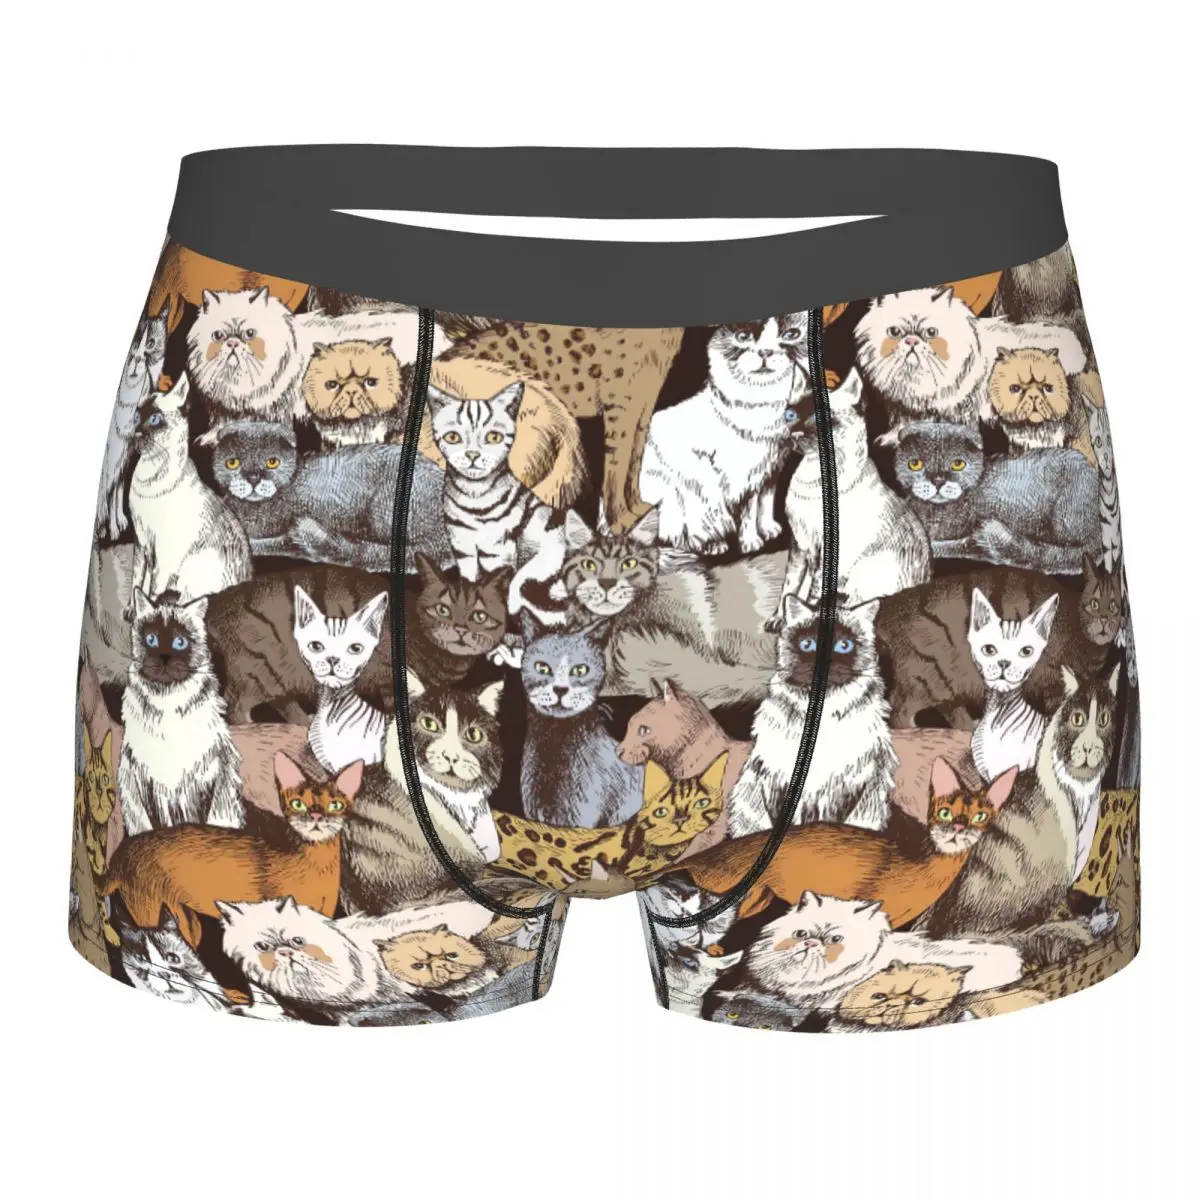 Seamless Pattern Purebred Cats Underpants Breathbale Panties Male Underwear Print Shorts Boxer Briefs